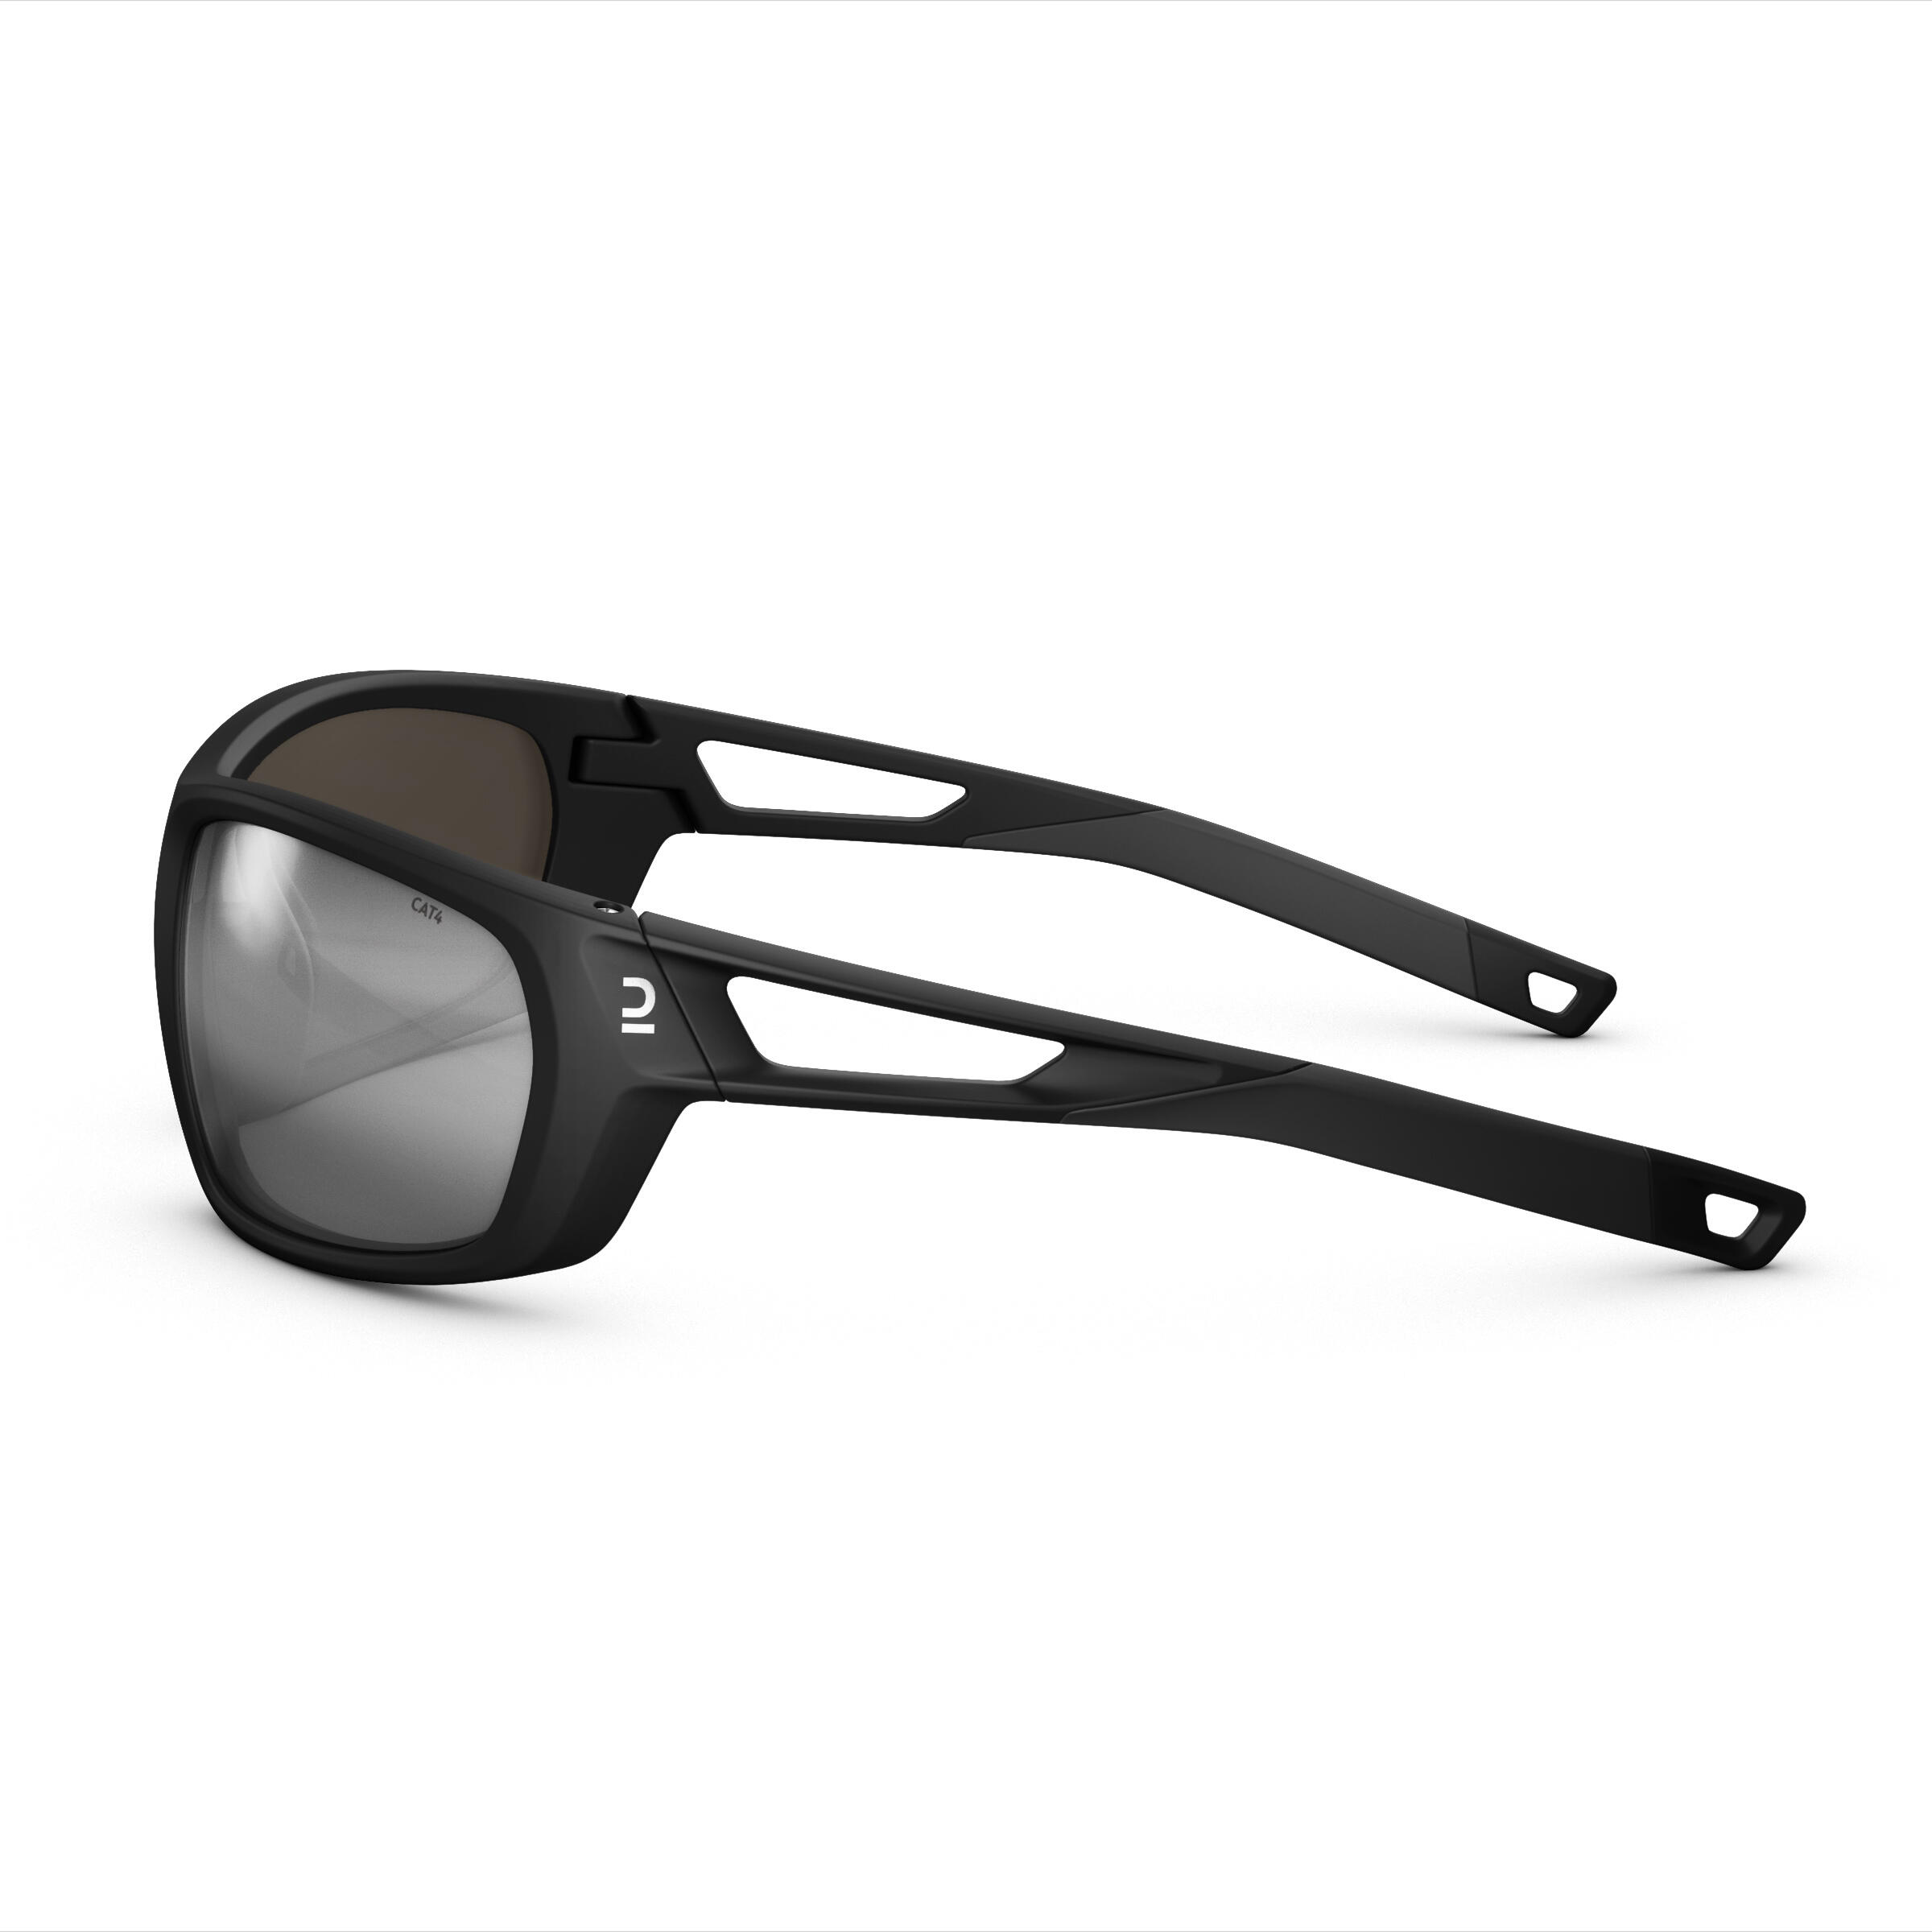 Adult hiking sunglasses MH580 – Category 4 6/9